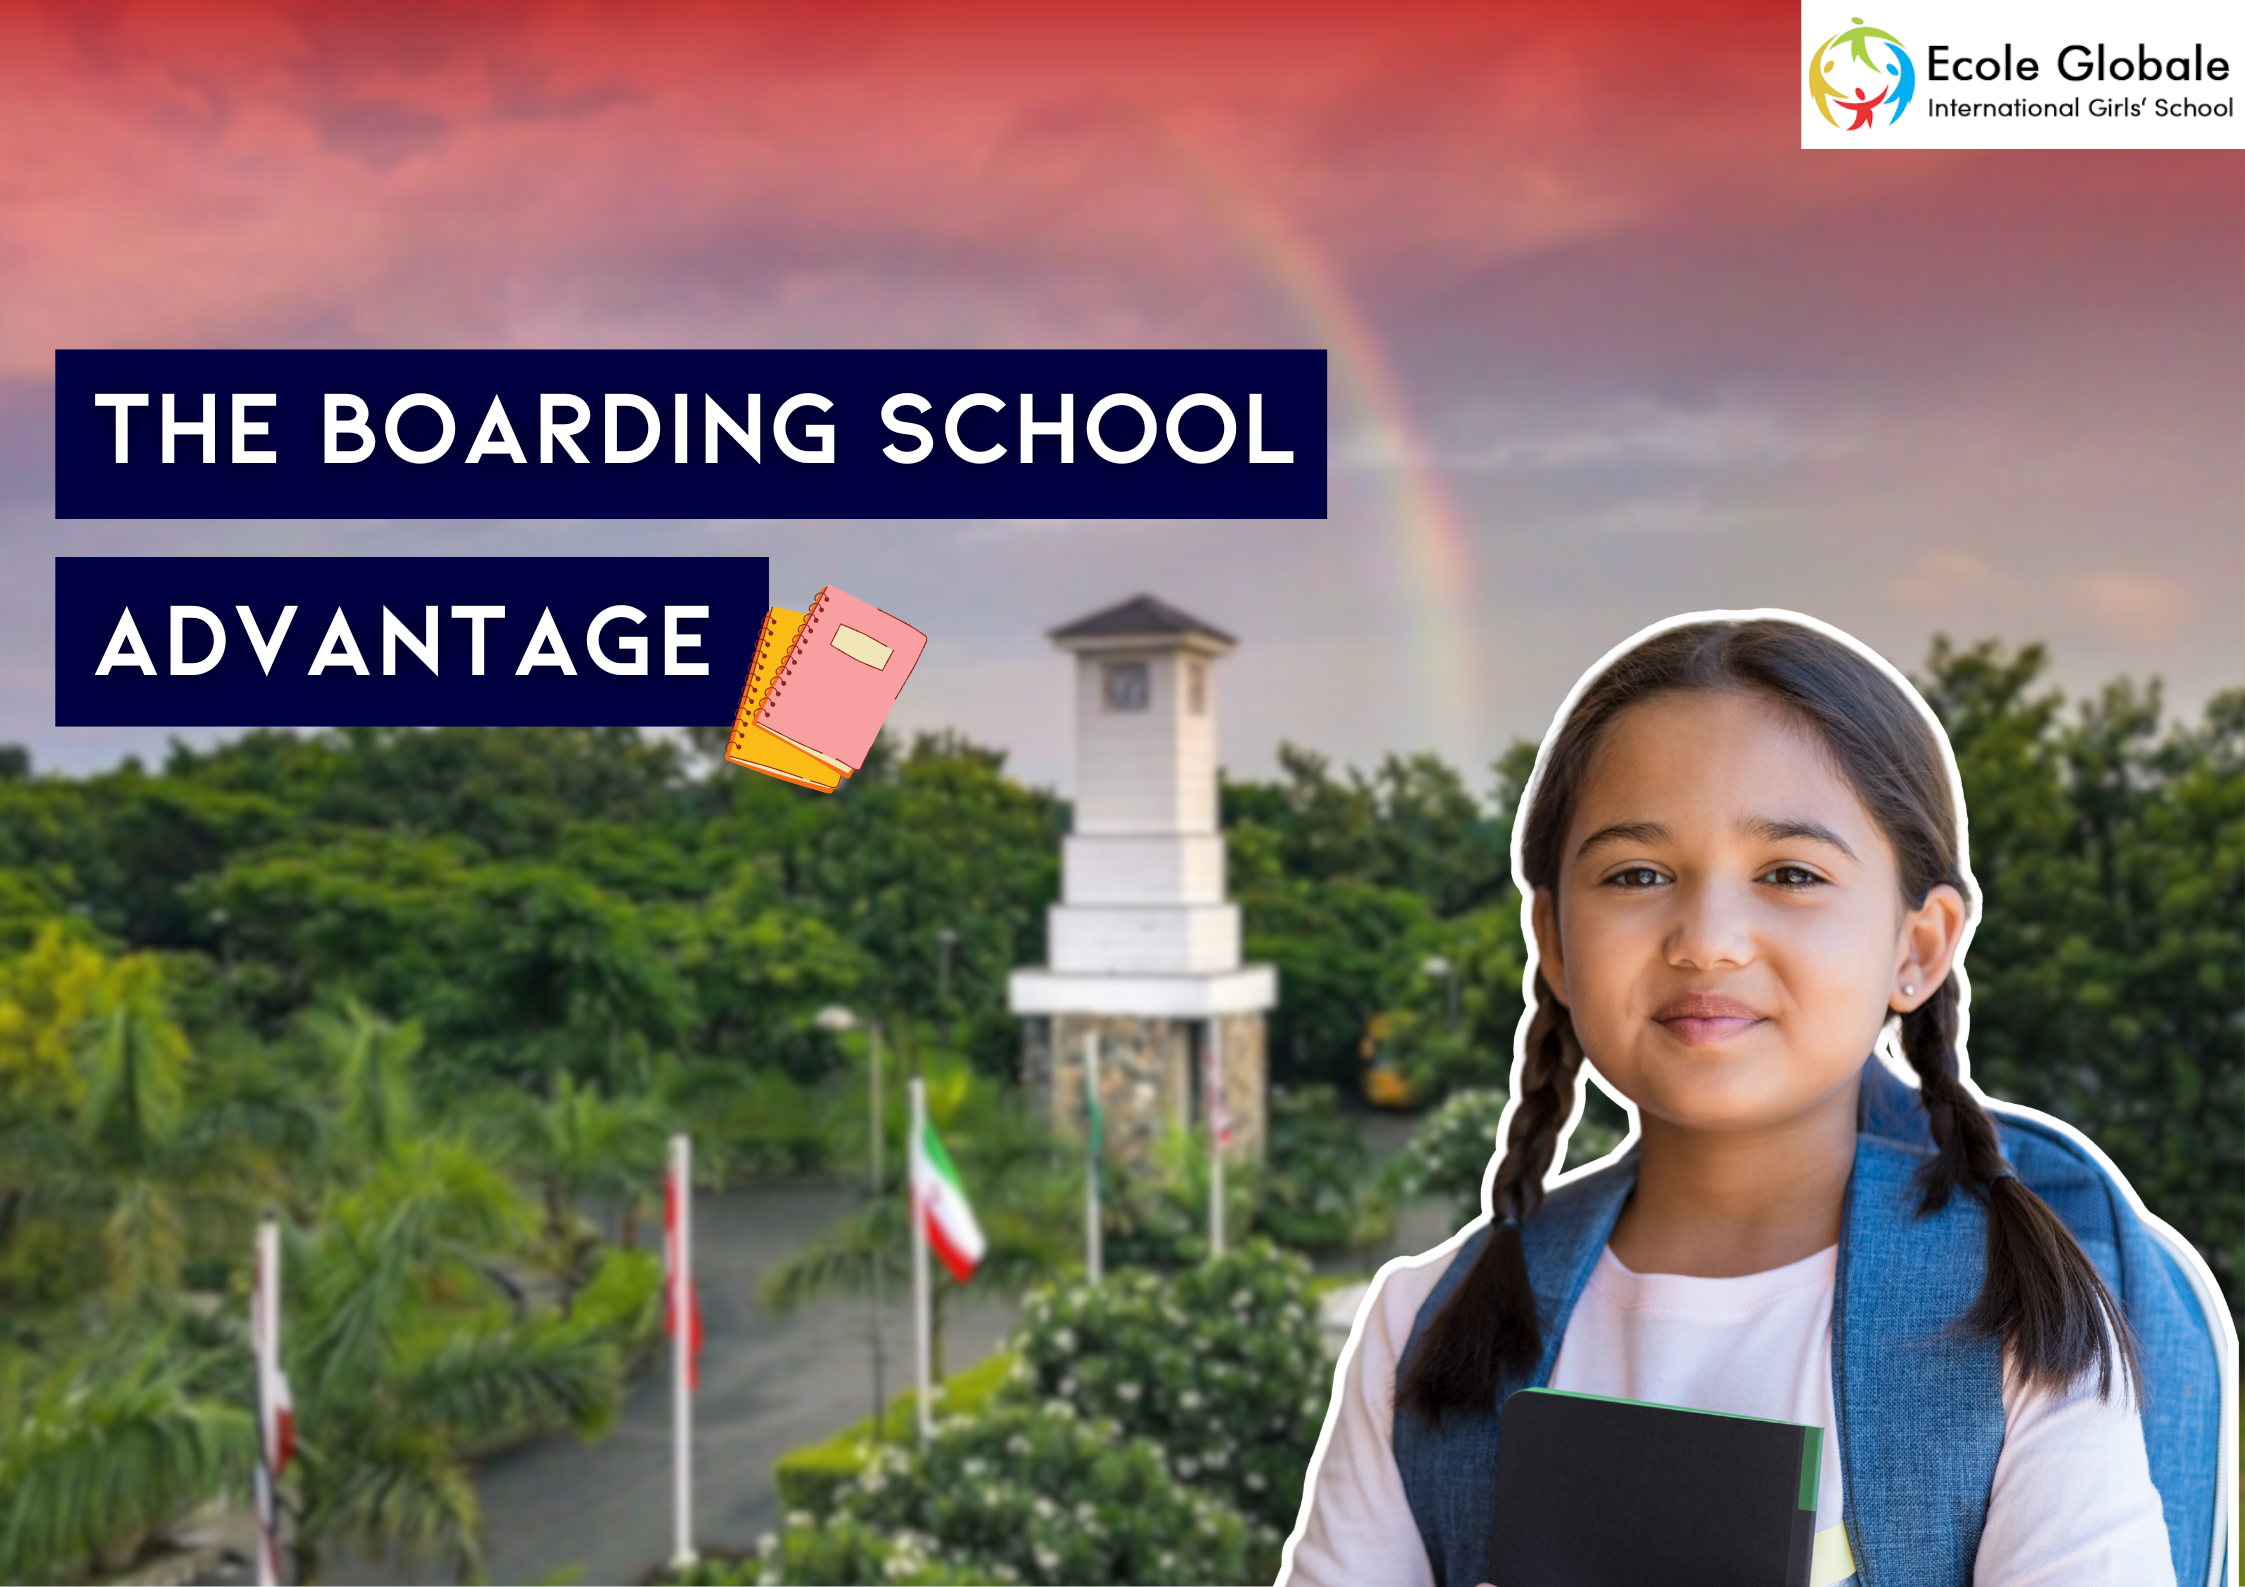 You are currently viewing The Boarding School Advantage: Preparing for Life at Ecole Globale